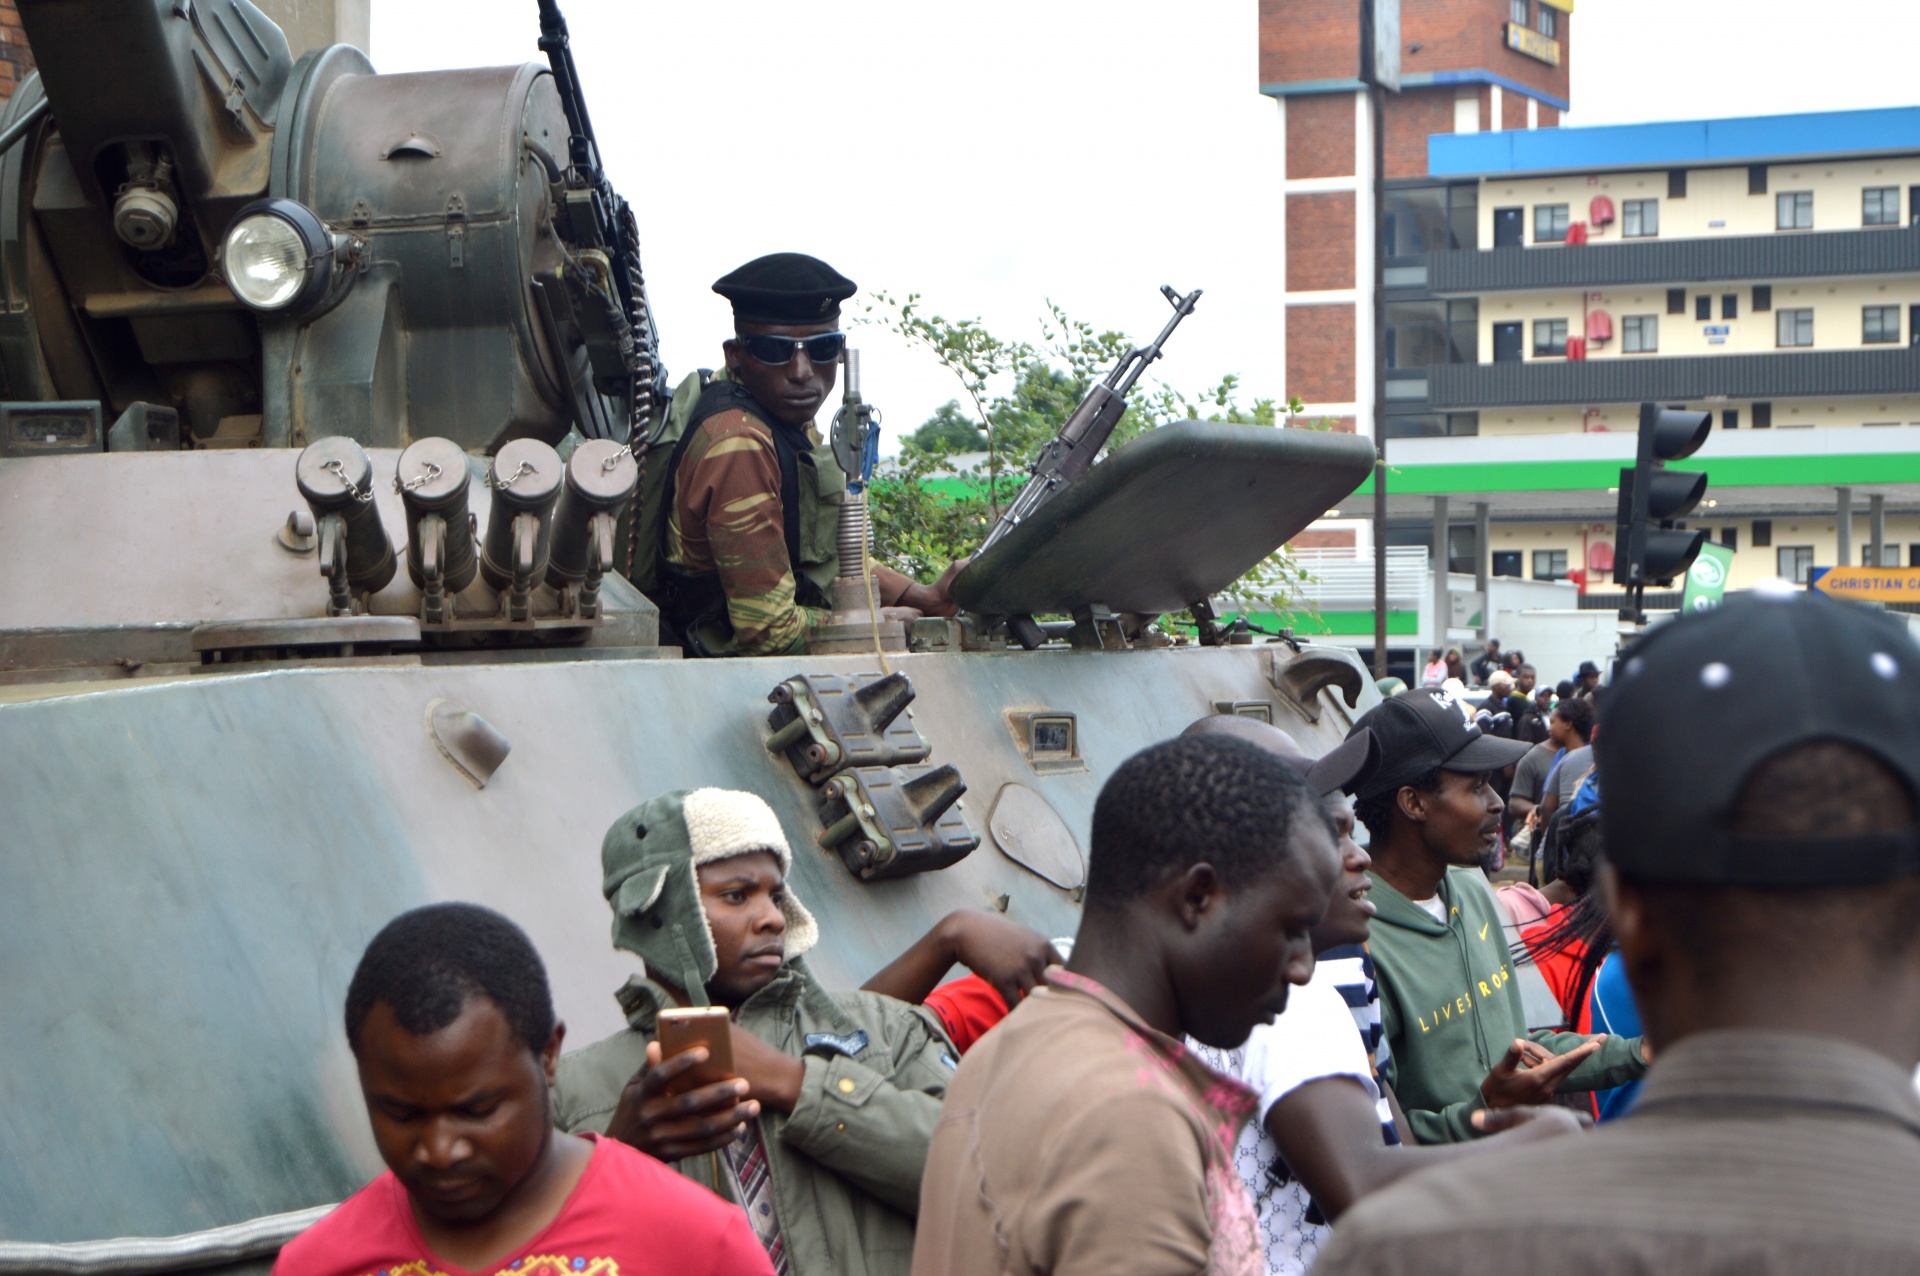 A tank in harare during the coup